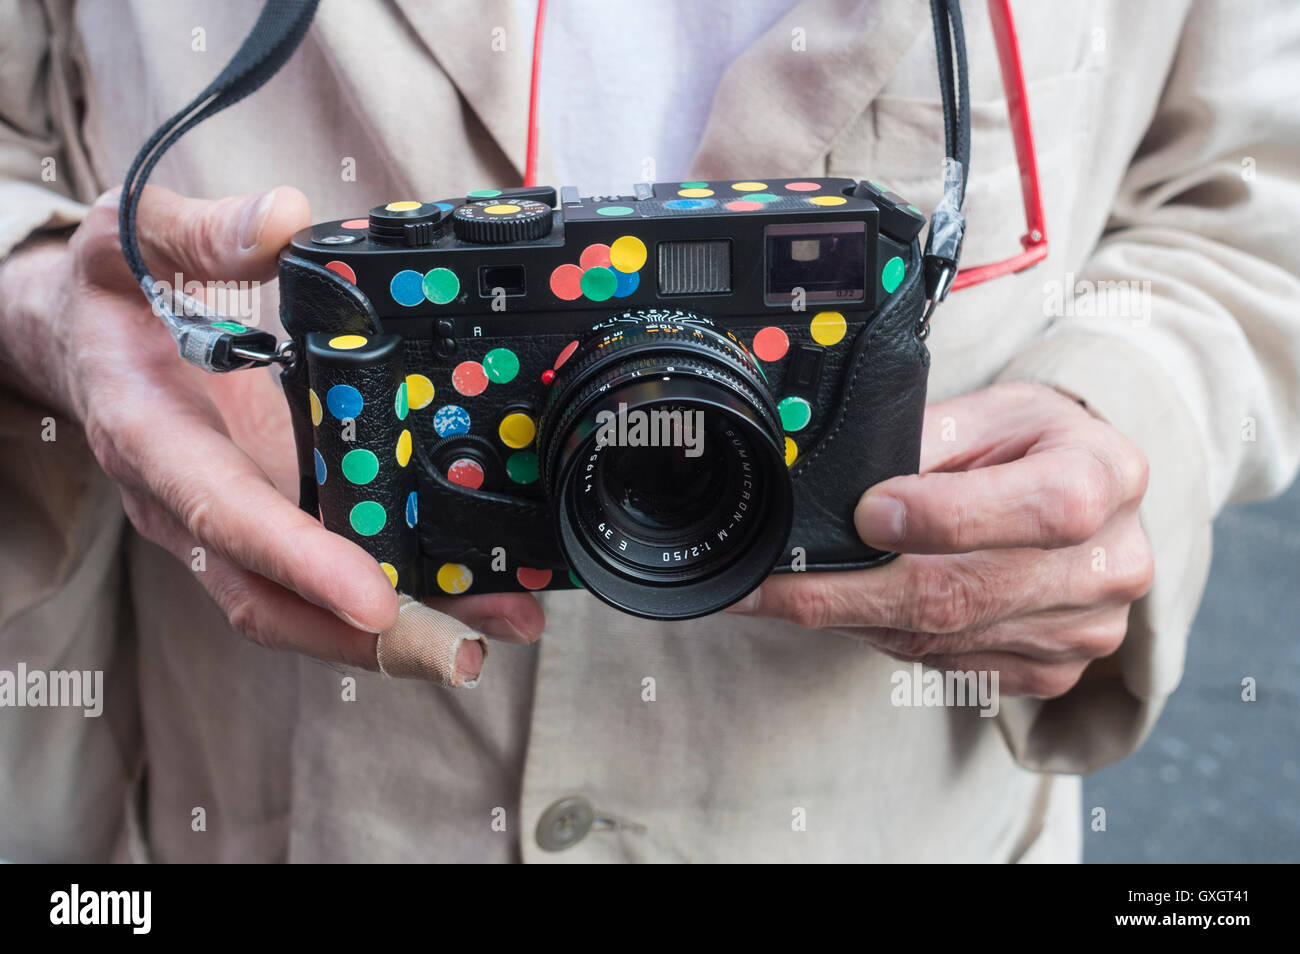 Leica M7 camera with Summacron f/2 50mm lens, covered with colorful dots  Stock Photo - Alamy